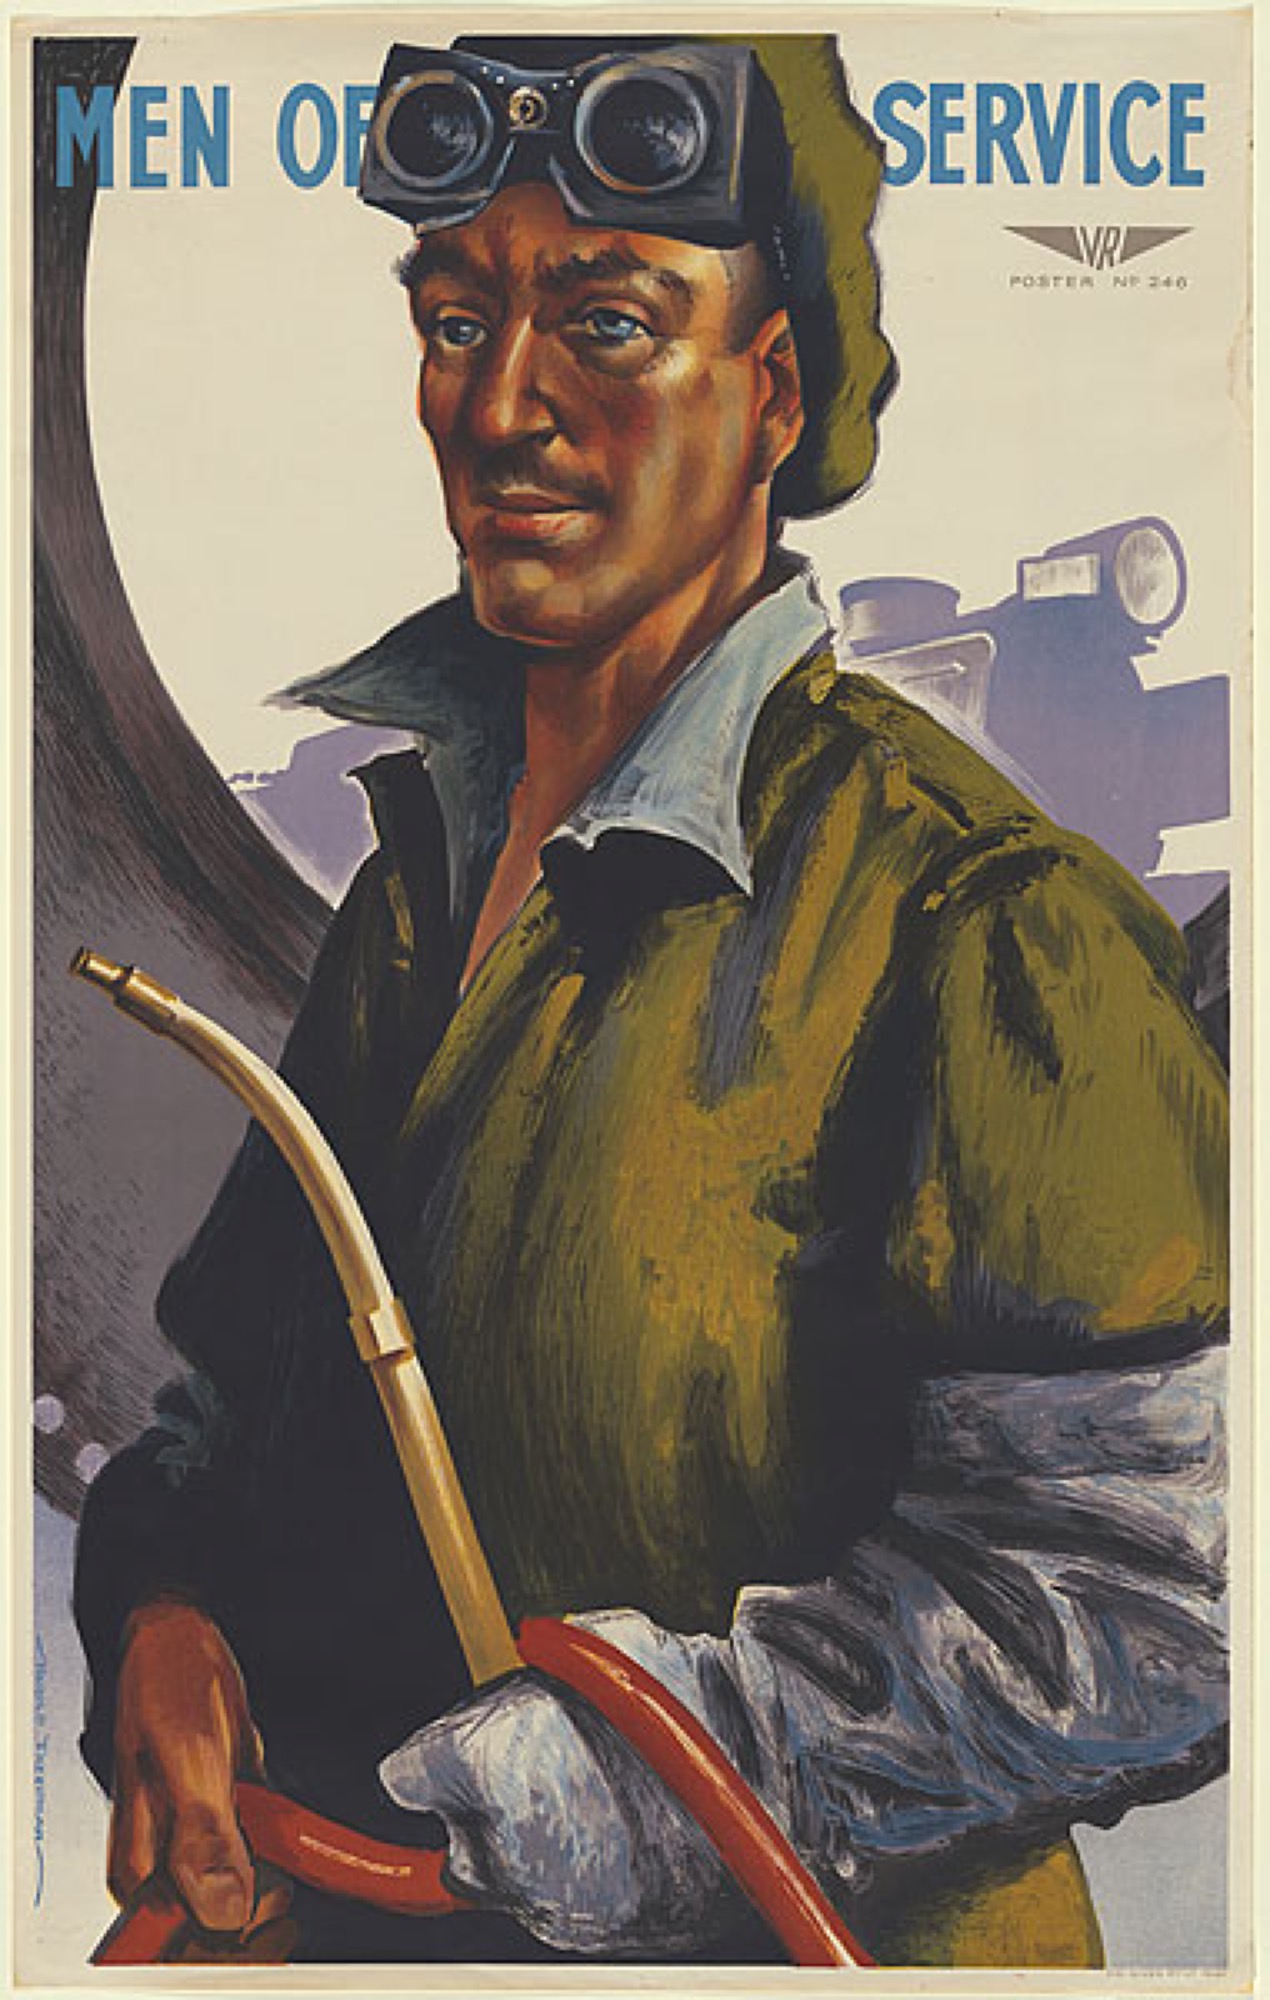 <em>Men of Service: The Welder</em>, 1947, lithograph, printed in colour inks, from multiple plates, 99.5 x 61.5 cm (printed image), Collection: National Gallery of Australia, Canberra